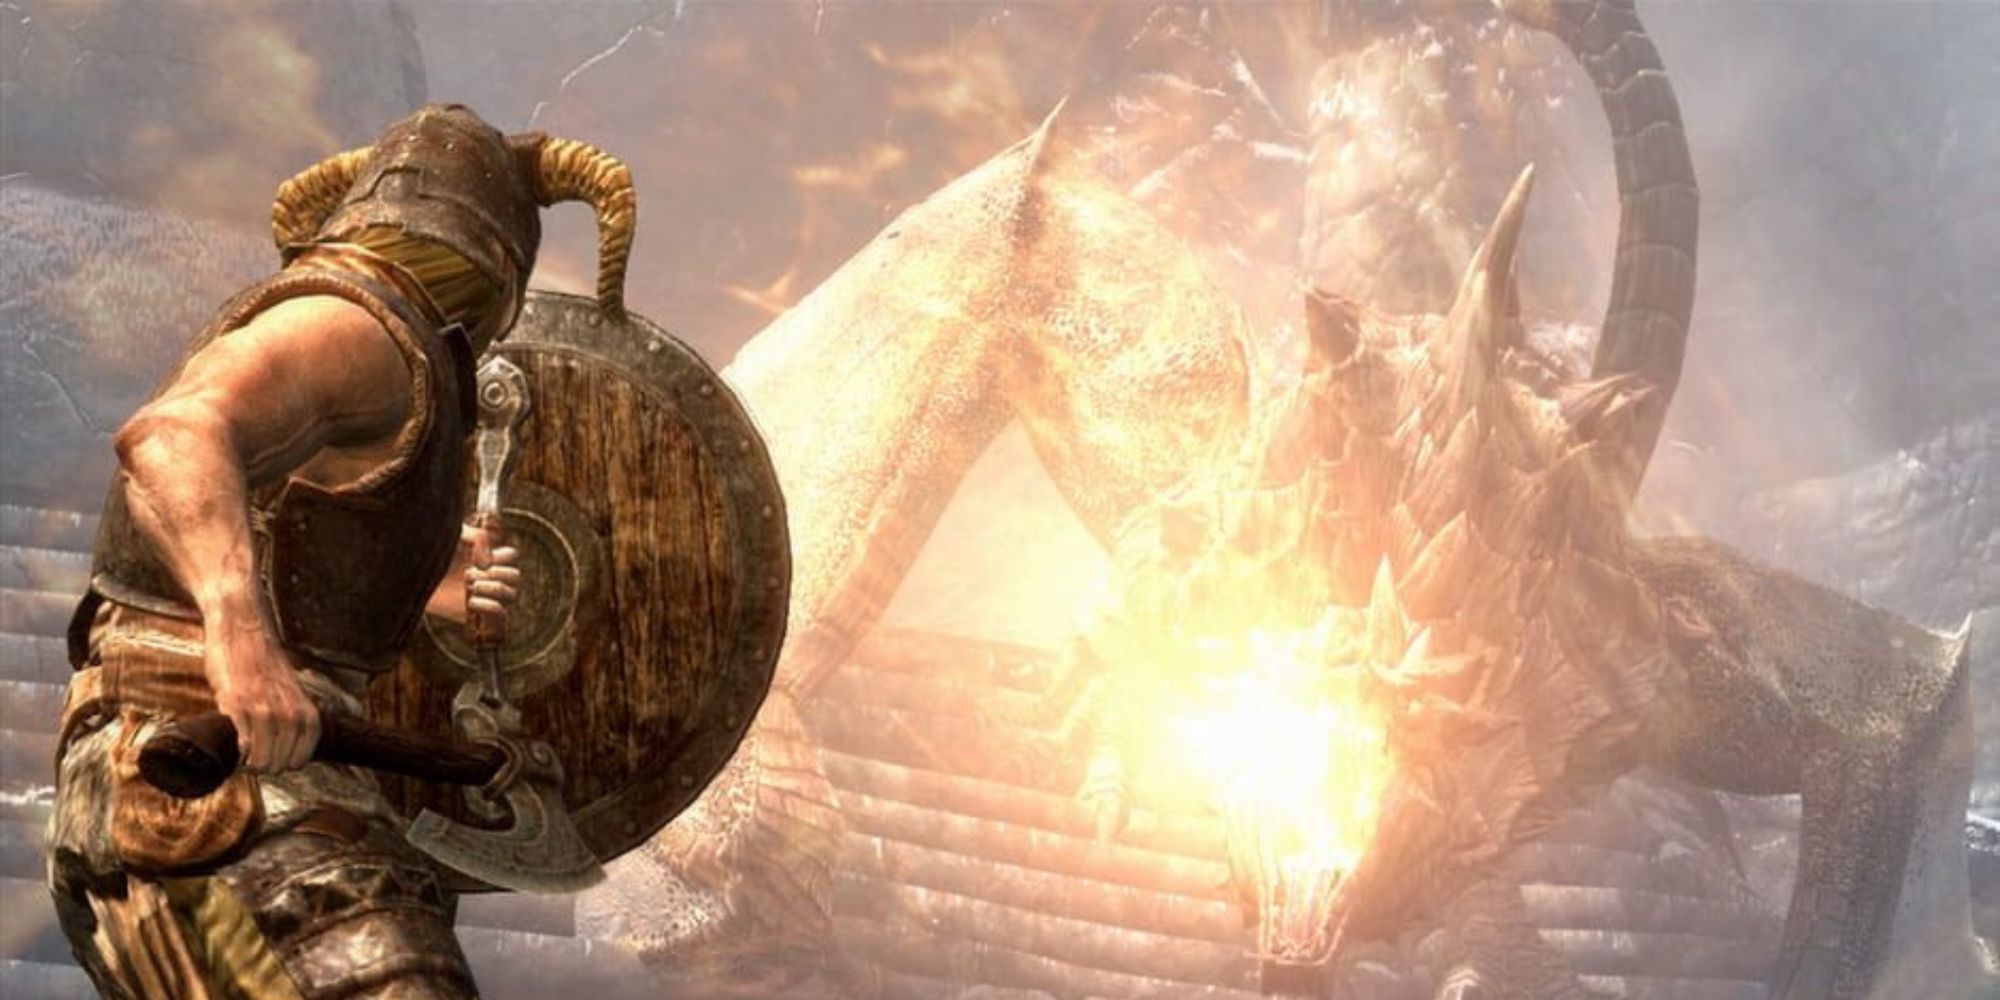 the Dragonborn holds a shield up as he faces a dragon breathing fire at him